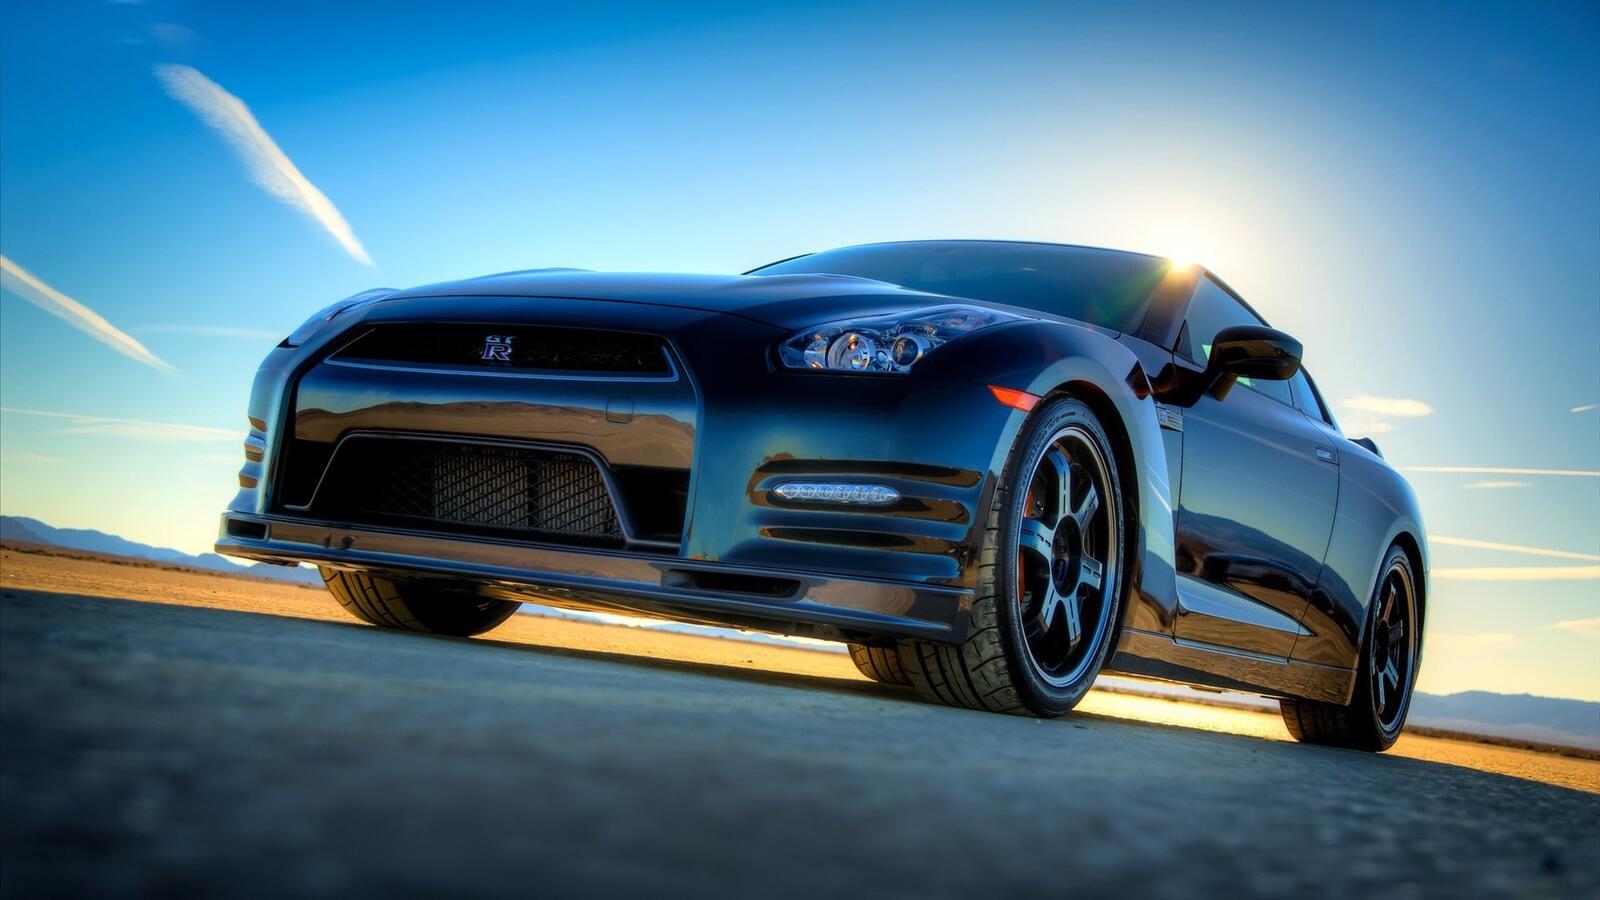 Wallpapers car vehicle Nissan on the desktop